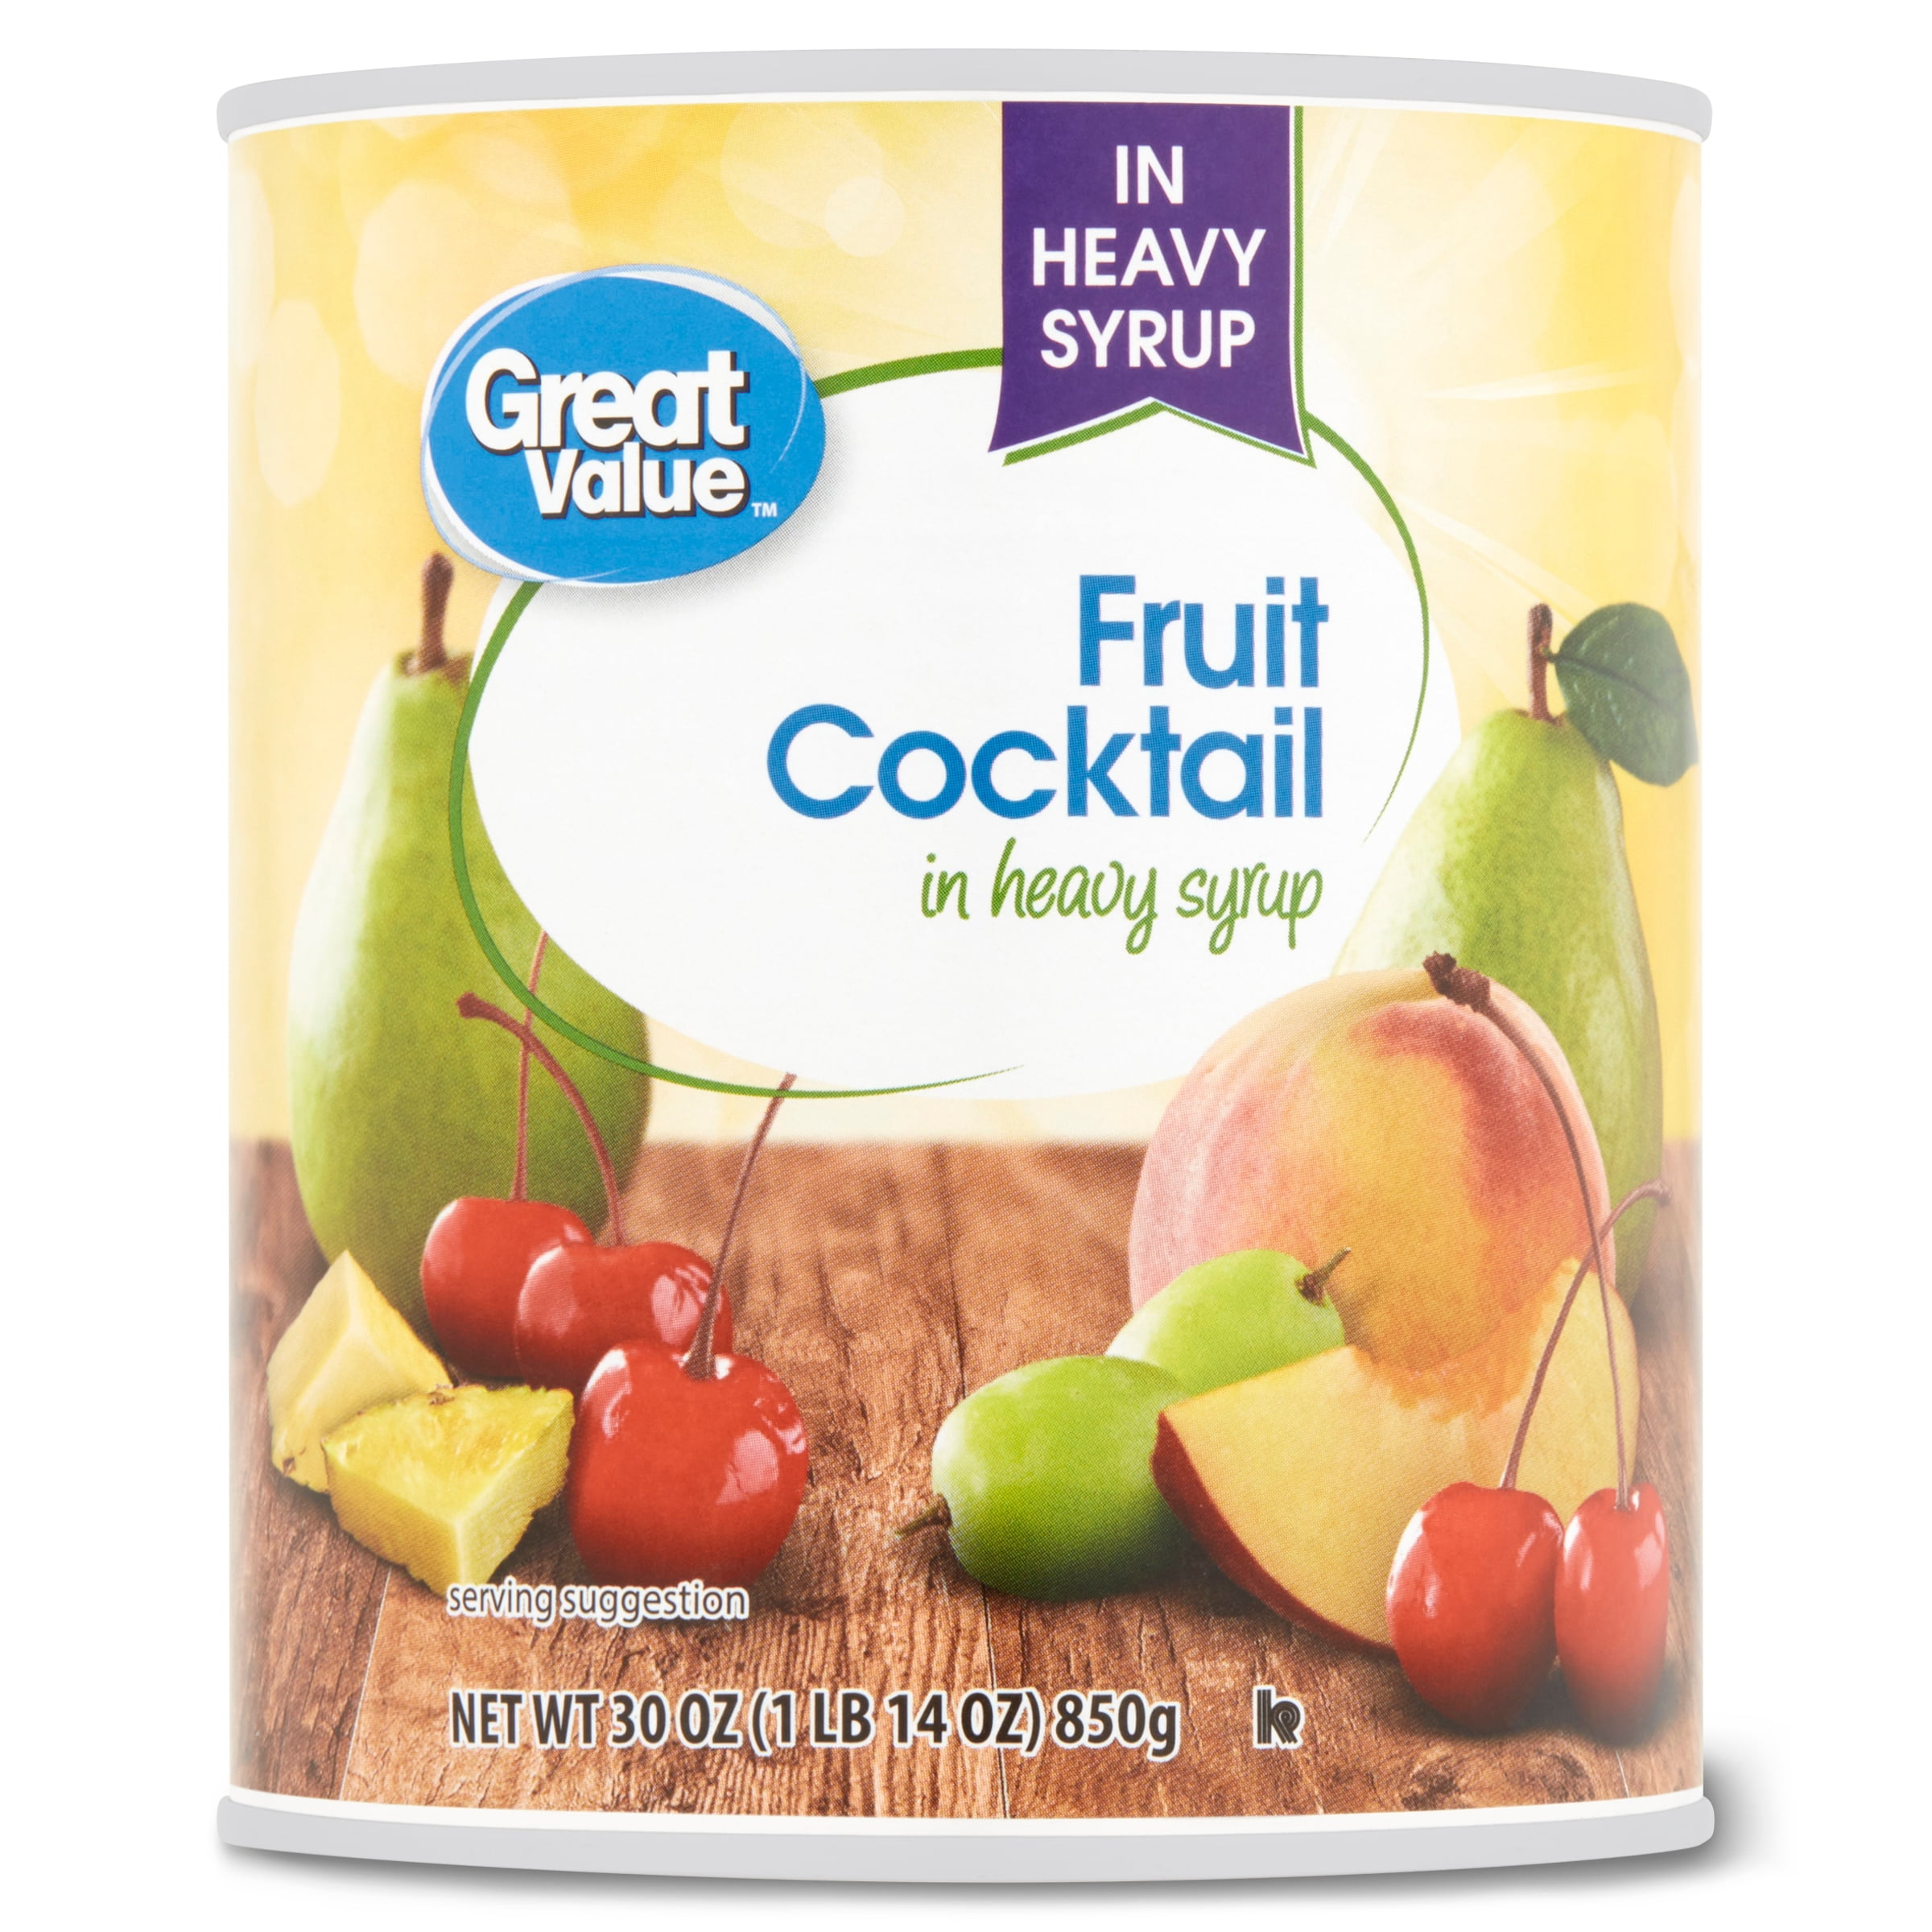 Great Value Fruit Cocktail in Heavy Syrup, 30 oz